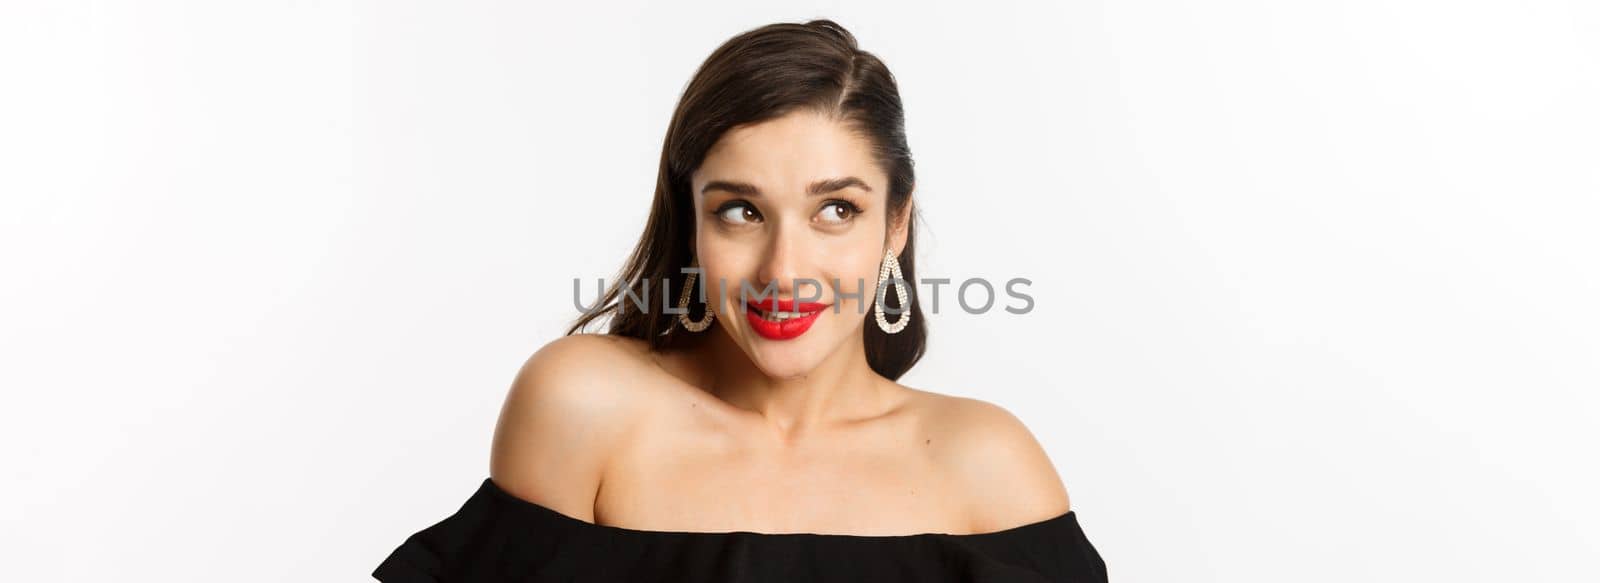 Fashion and beauty concept. Close-up of beautiful woman with red lips, makeup and black dress, showing her earrings and looking pleased, white background by Benzoix